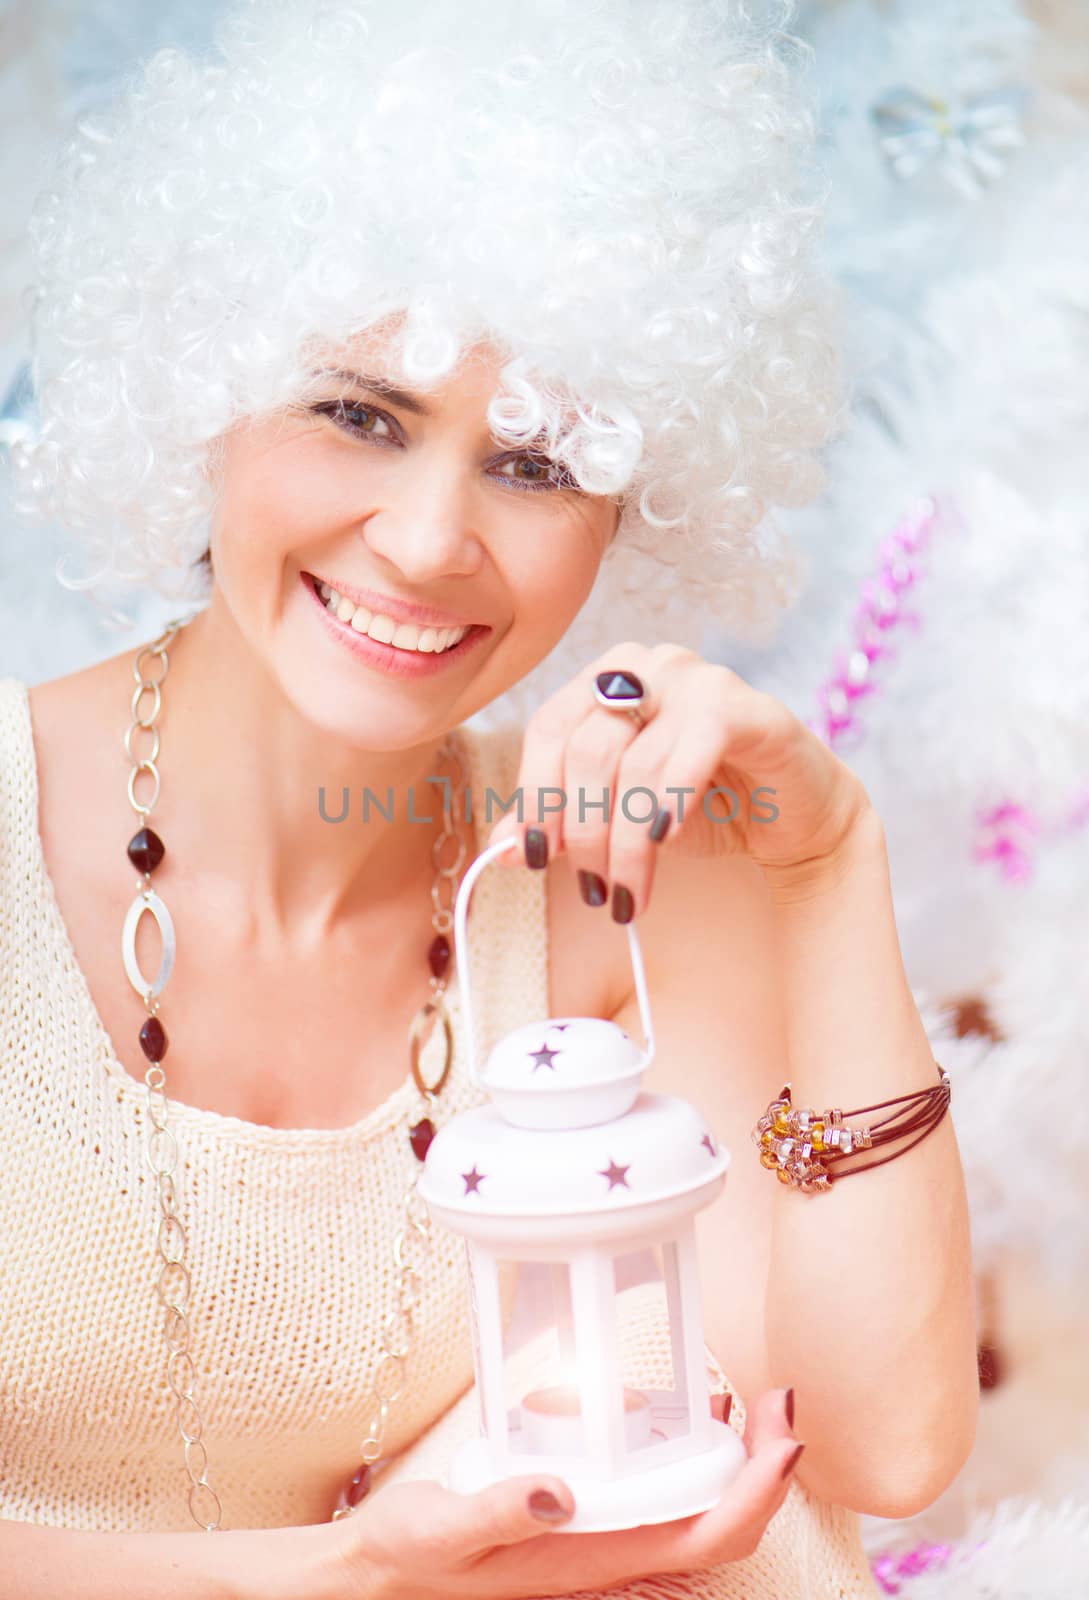 beautiful girl with white hair holding a lantern